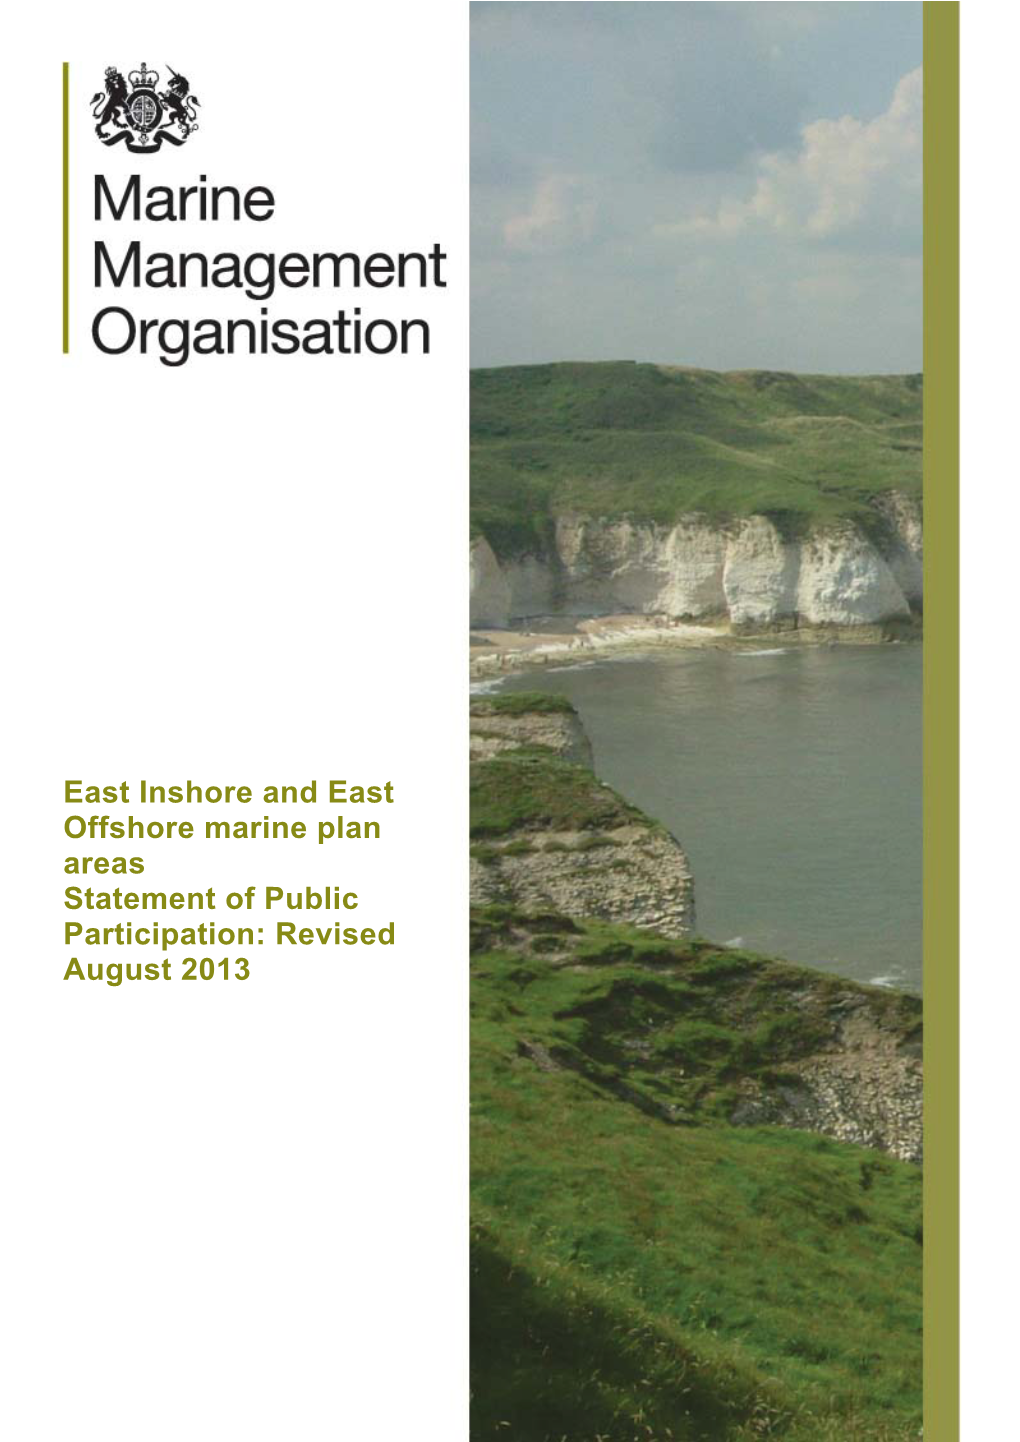 East Inshore and East Offshore Marine Plan Areas Statement of Public Participation: Revised August 2013 Statement of Public Participation: August 2013